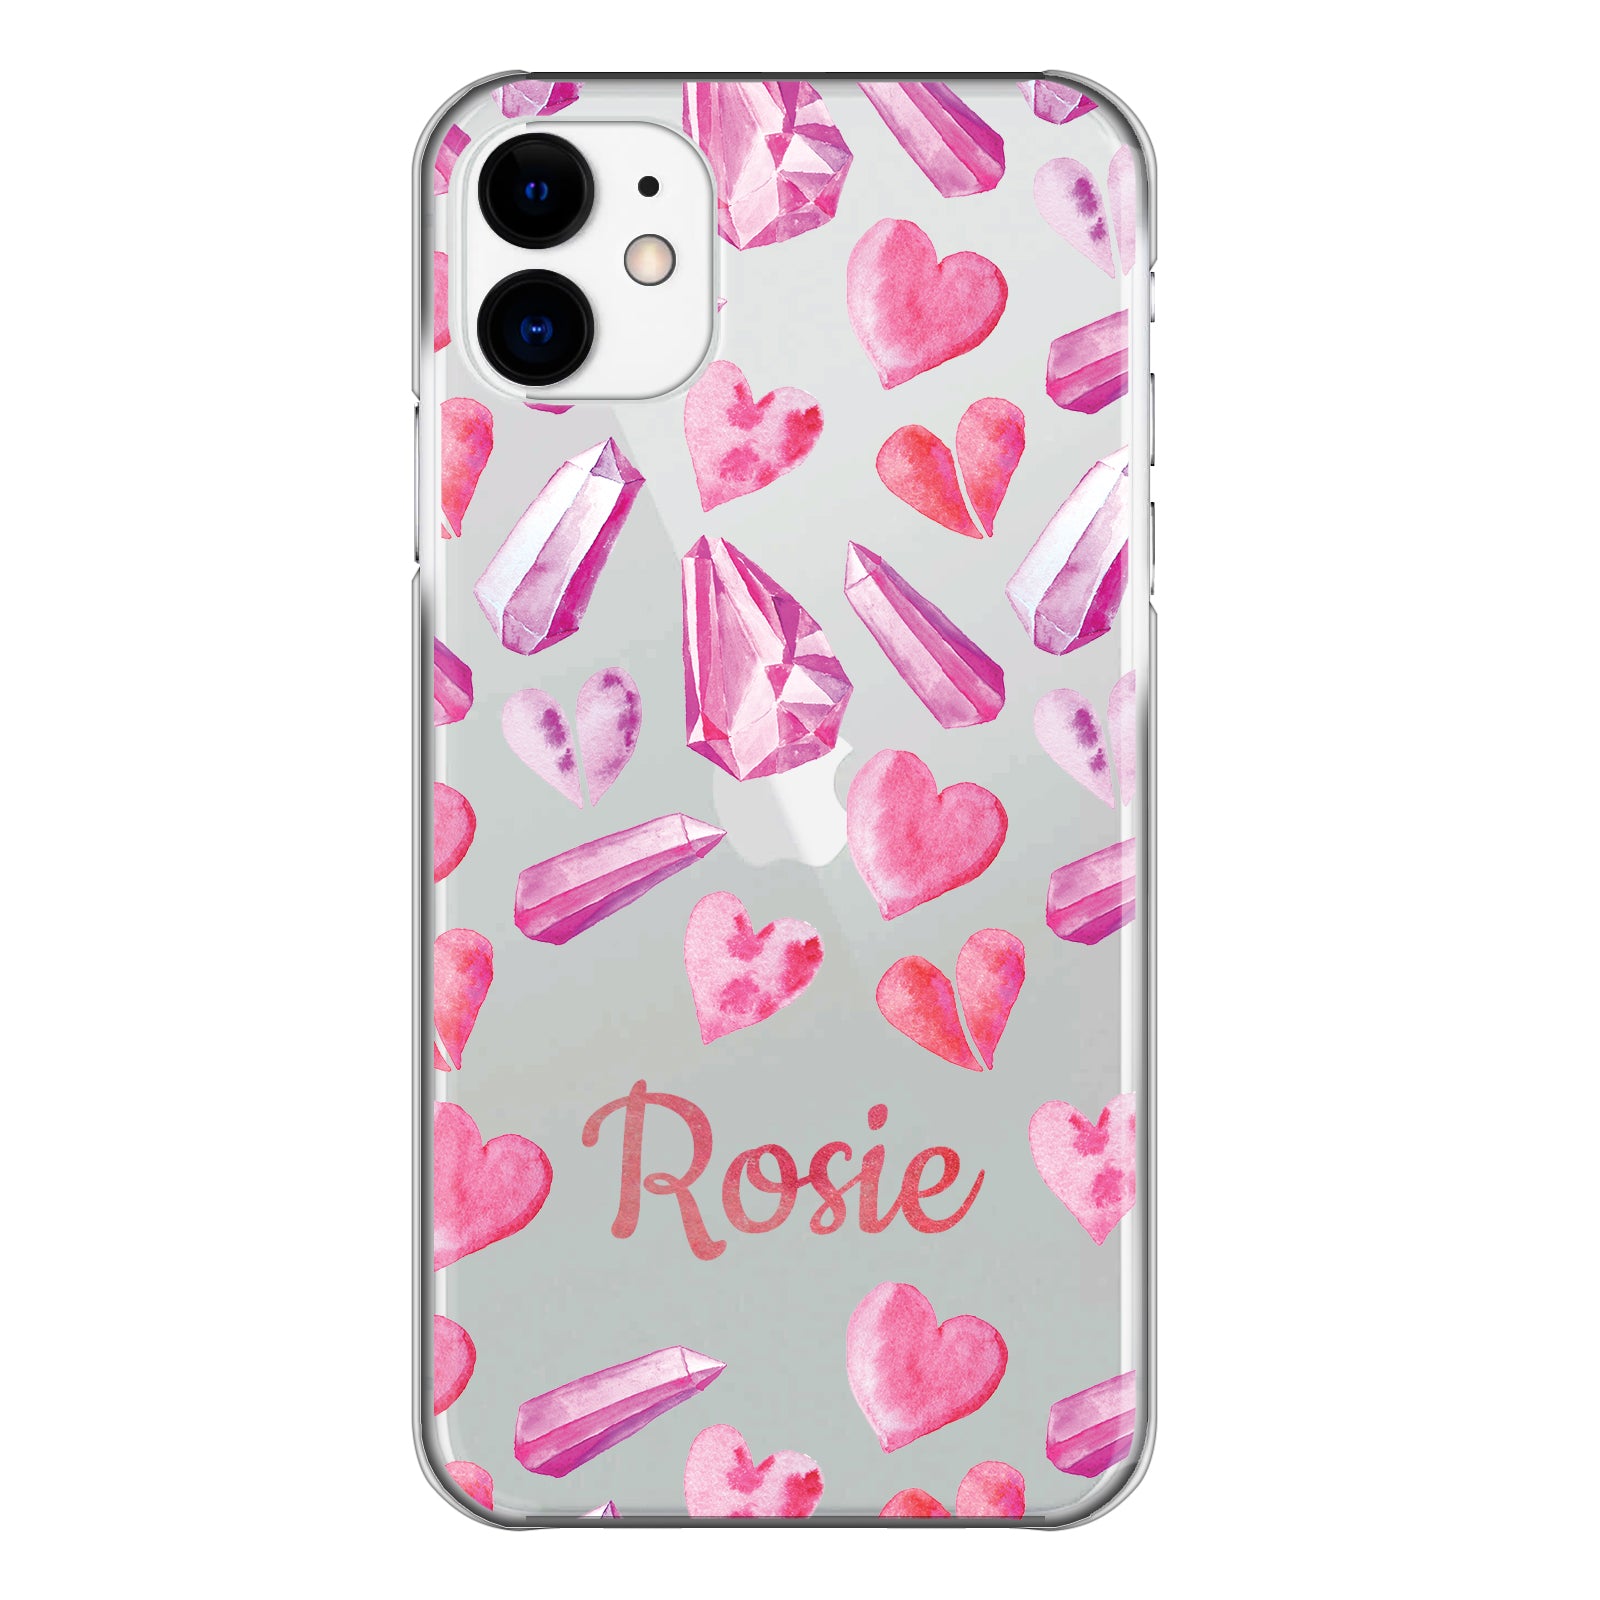 Personalised Oppo Phone Hard Case with Crystal Hearts and Cute Pink Text